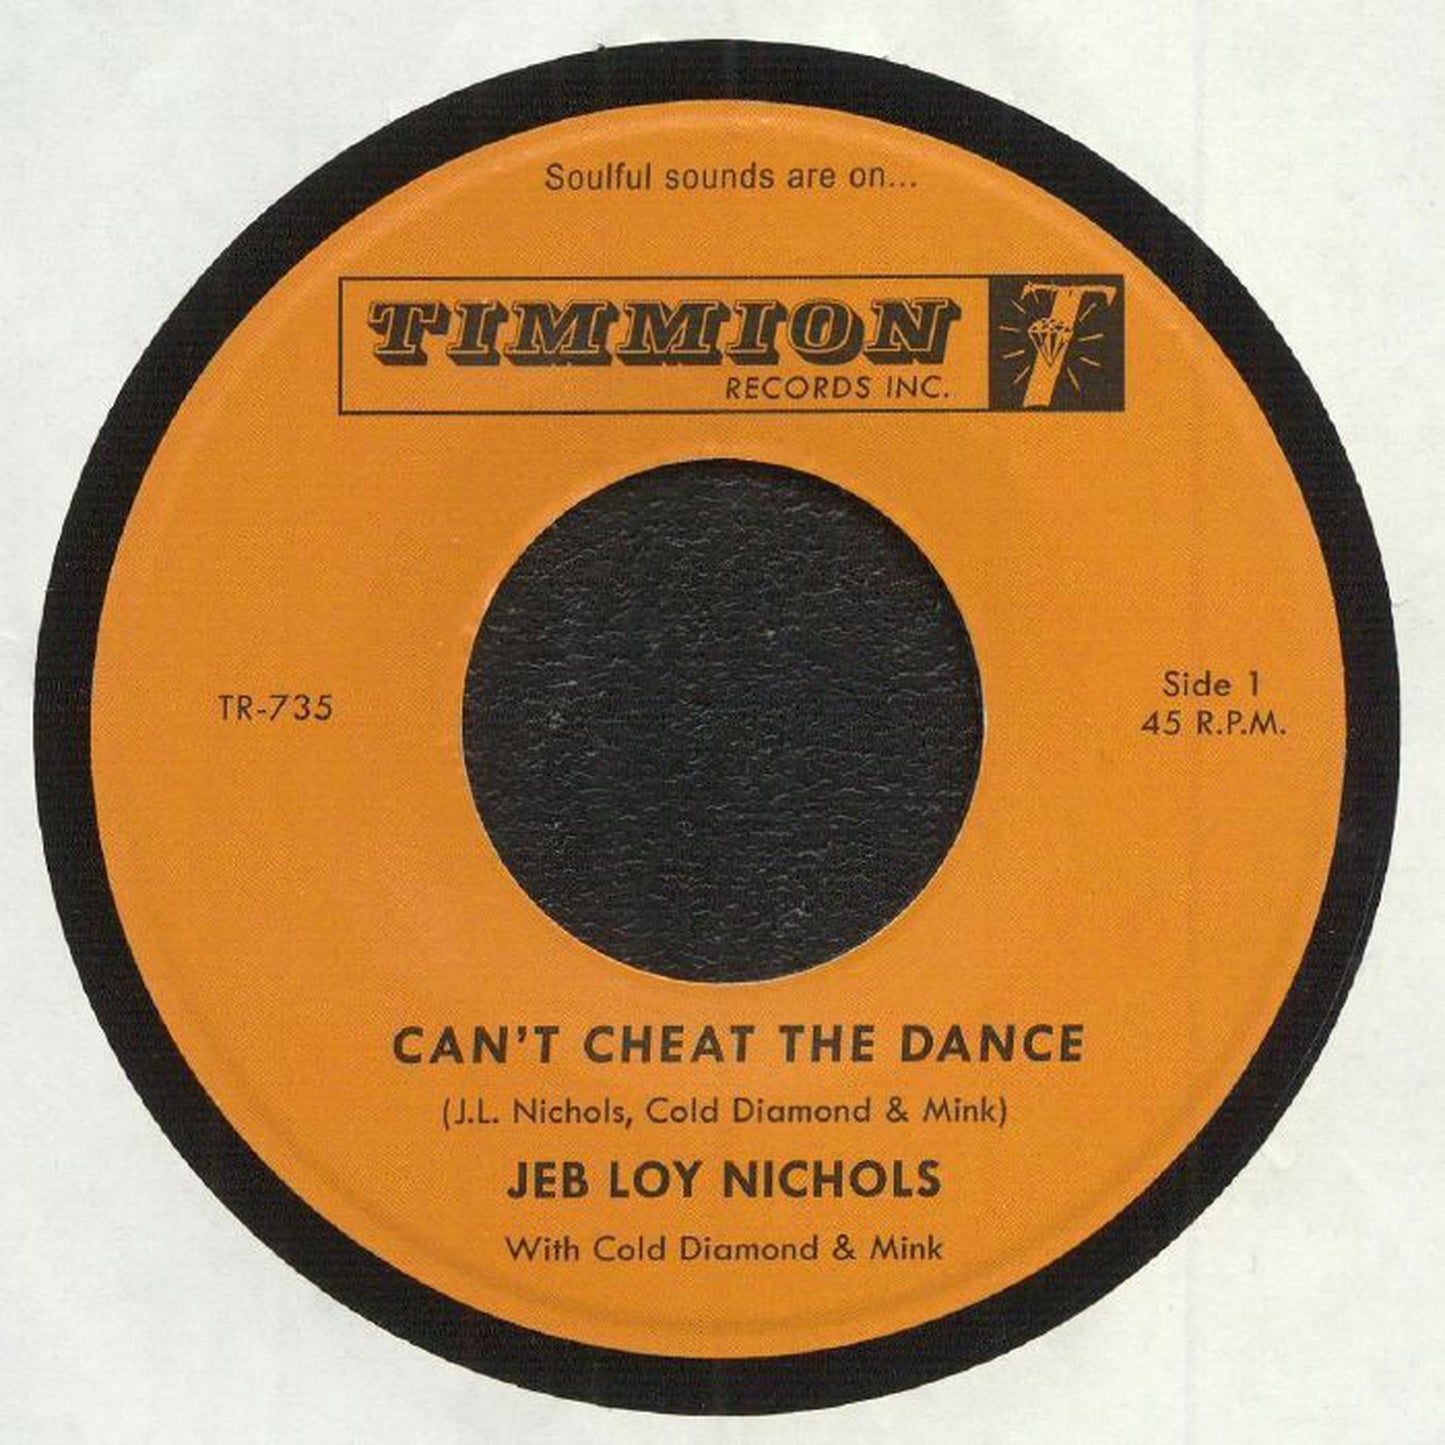 【7"】Jeb Loy Nichols - Can't Cheat The Dance